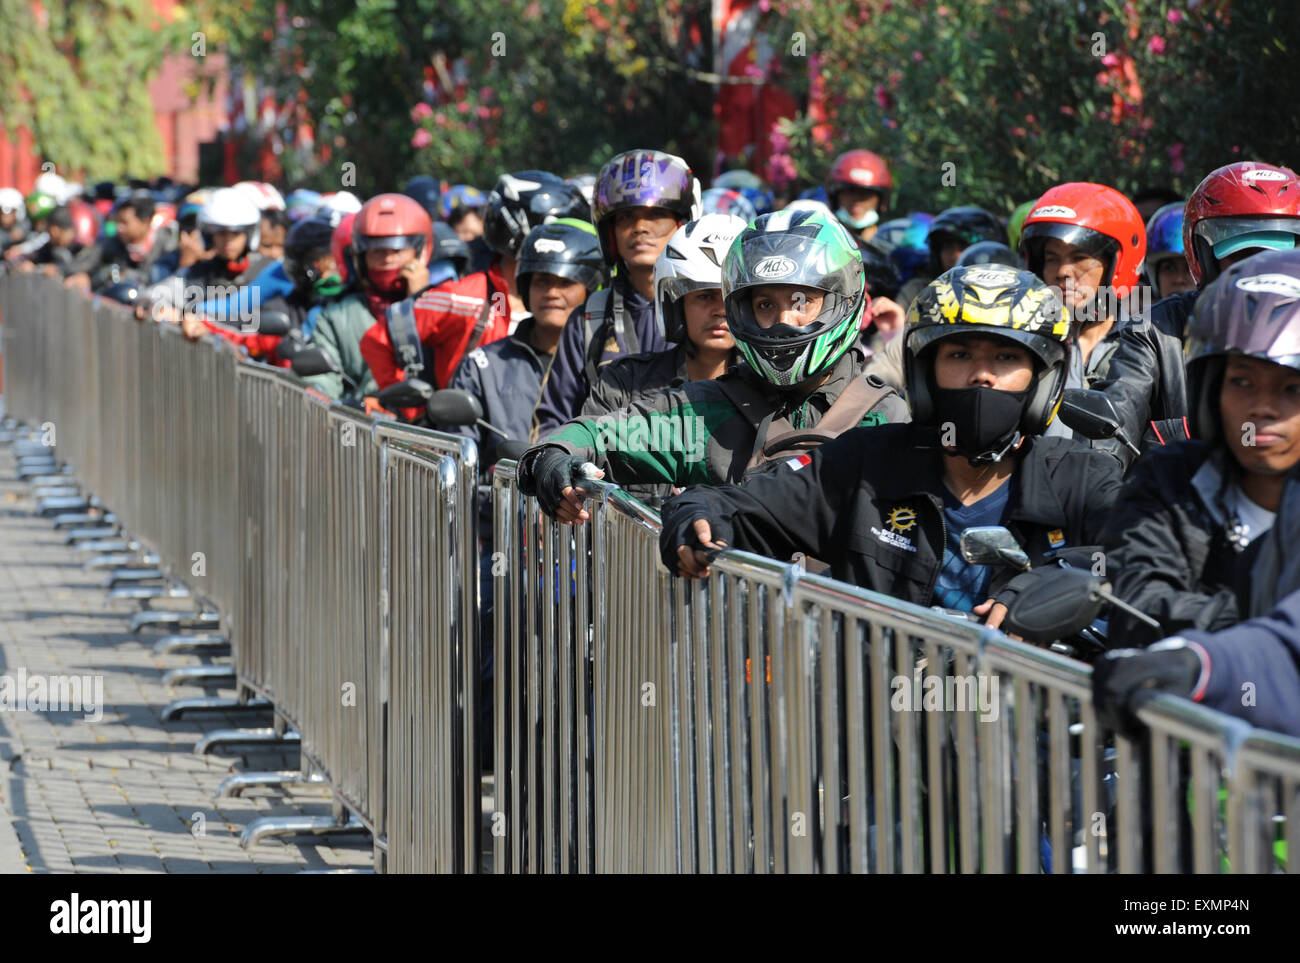 Jakarta, Indonesia. 15th July, 2015. Motorbike riders queue to board a ferry ship in Jakarta, Indonesia, July 15, 2015. Indonesia's traffic reaches its peak as millions of people travel to their hometowns to celebrate the upcoming Eid al-Fitr festival. Credit:  He Changshan/Xinhua/Alamy Live News Stock Photo